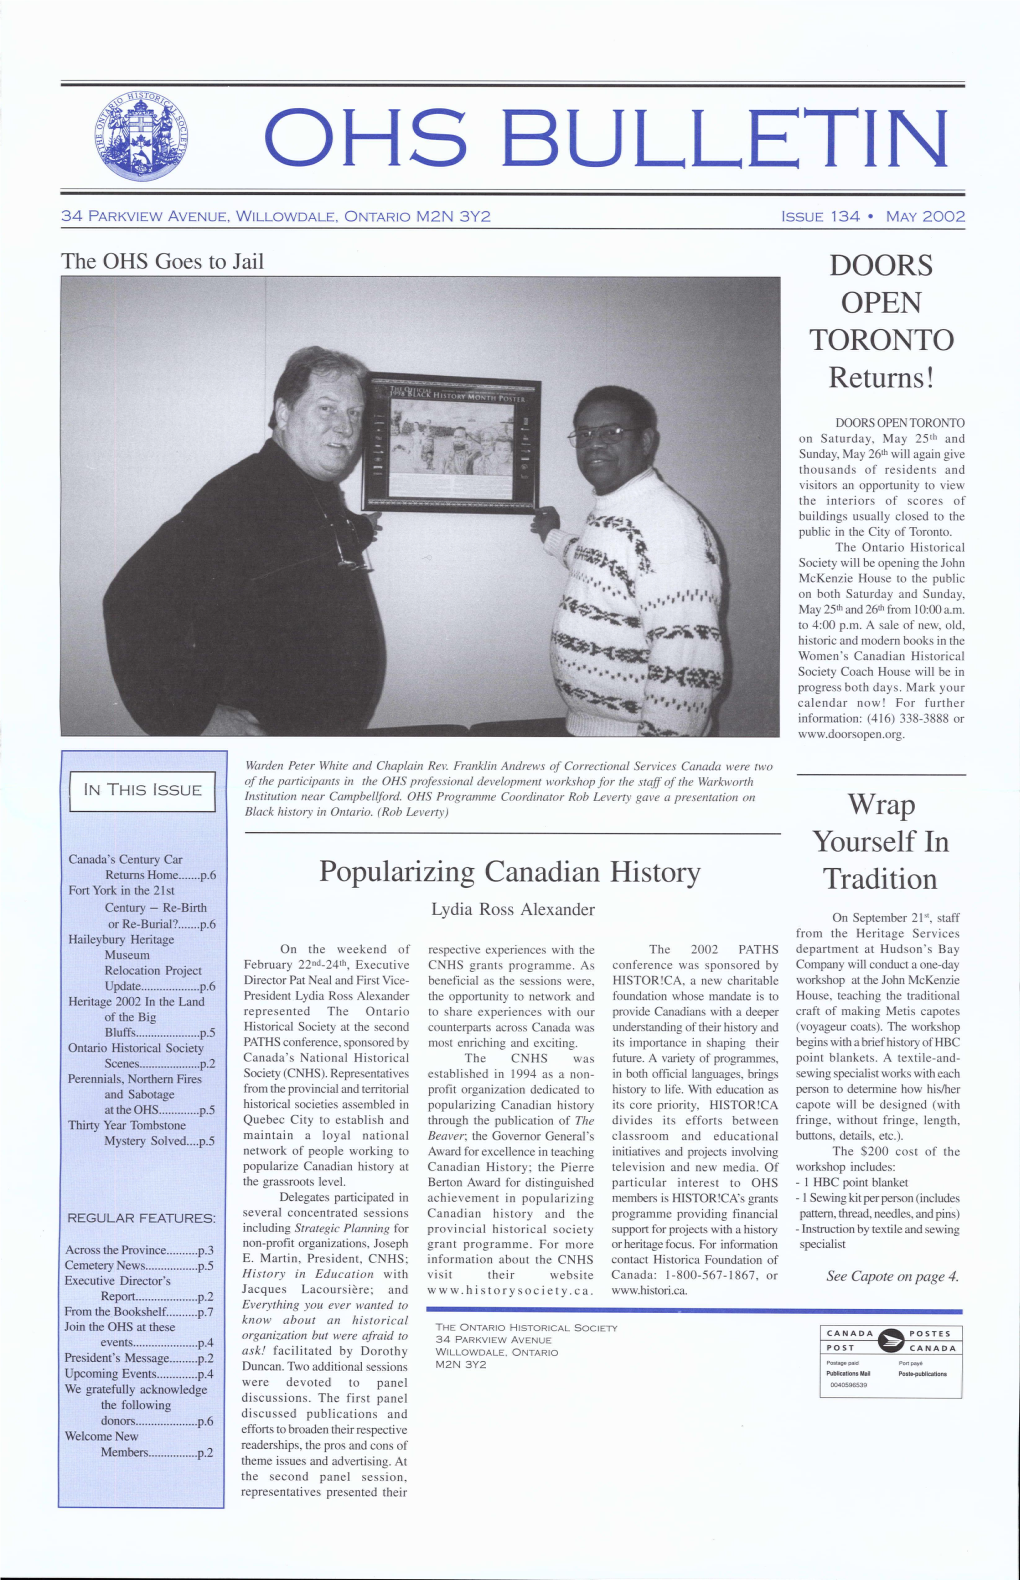 May 2002 OHS Bulletin, Issue